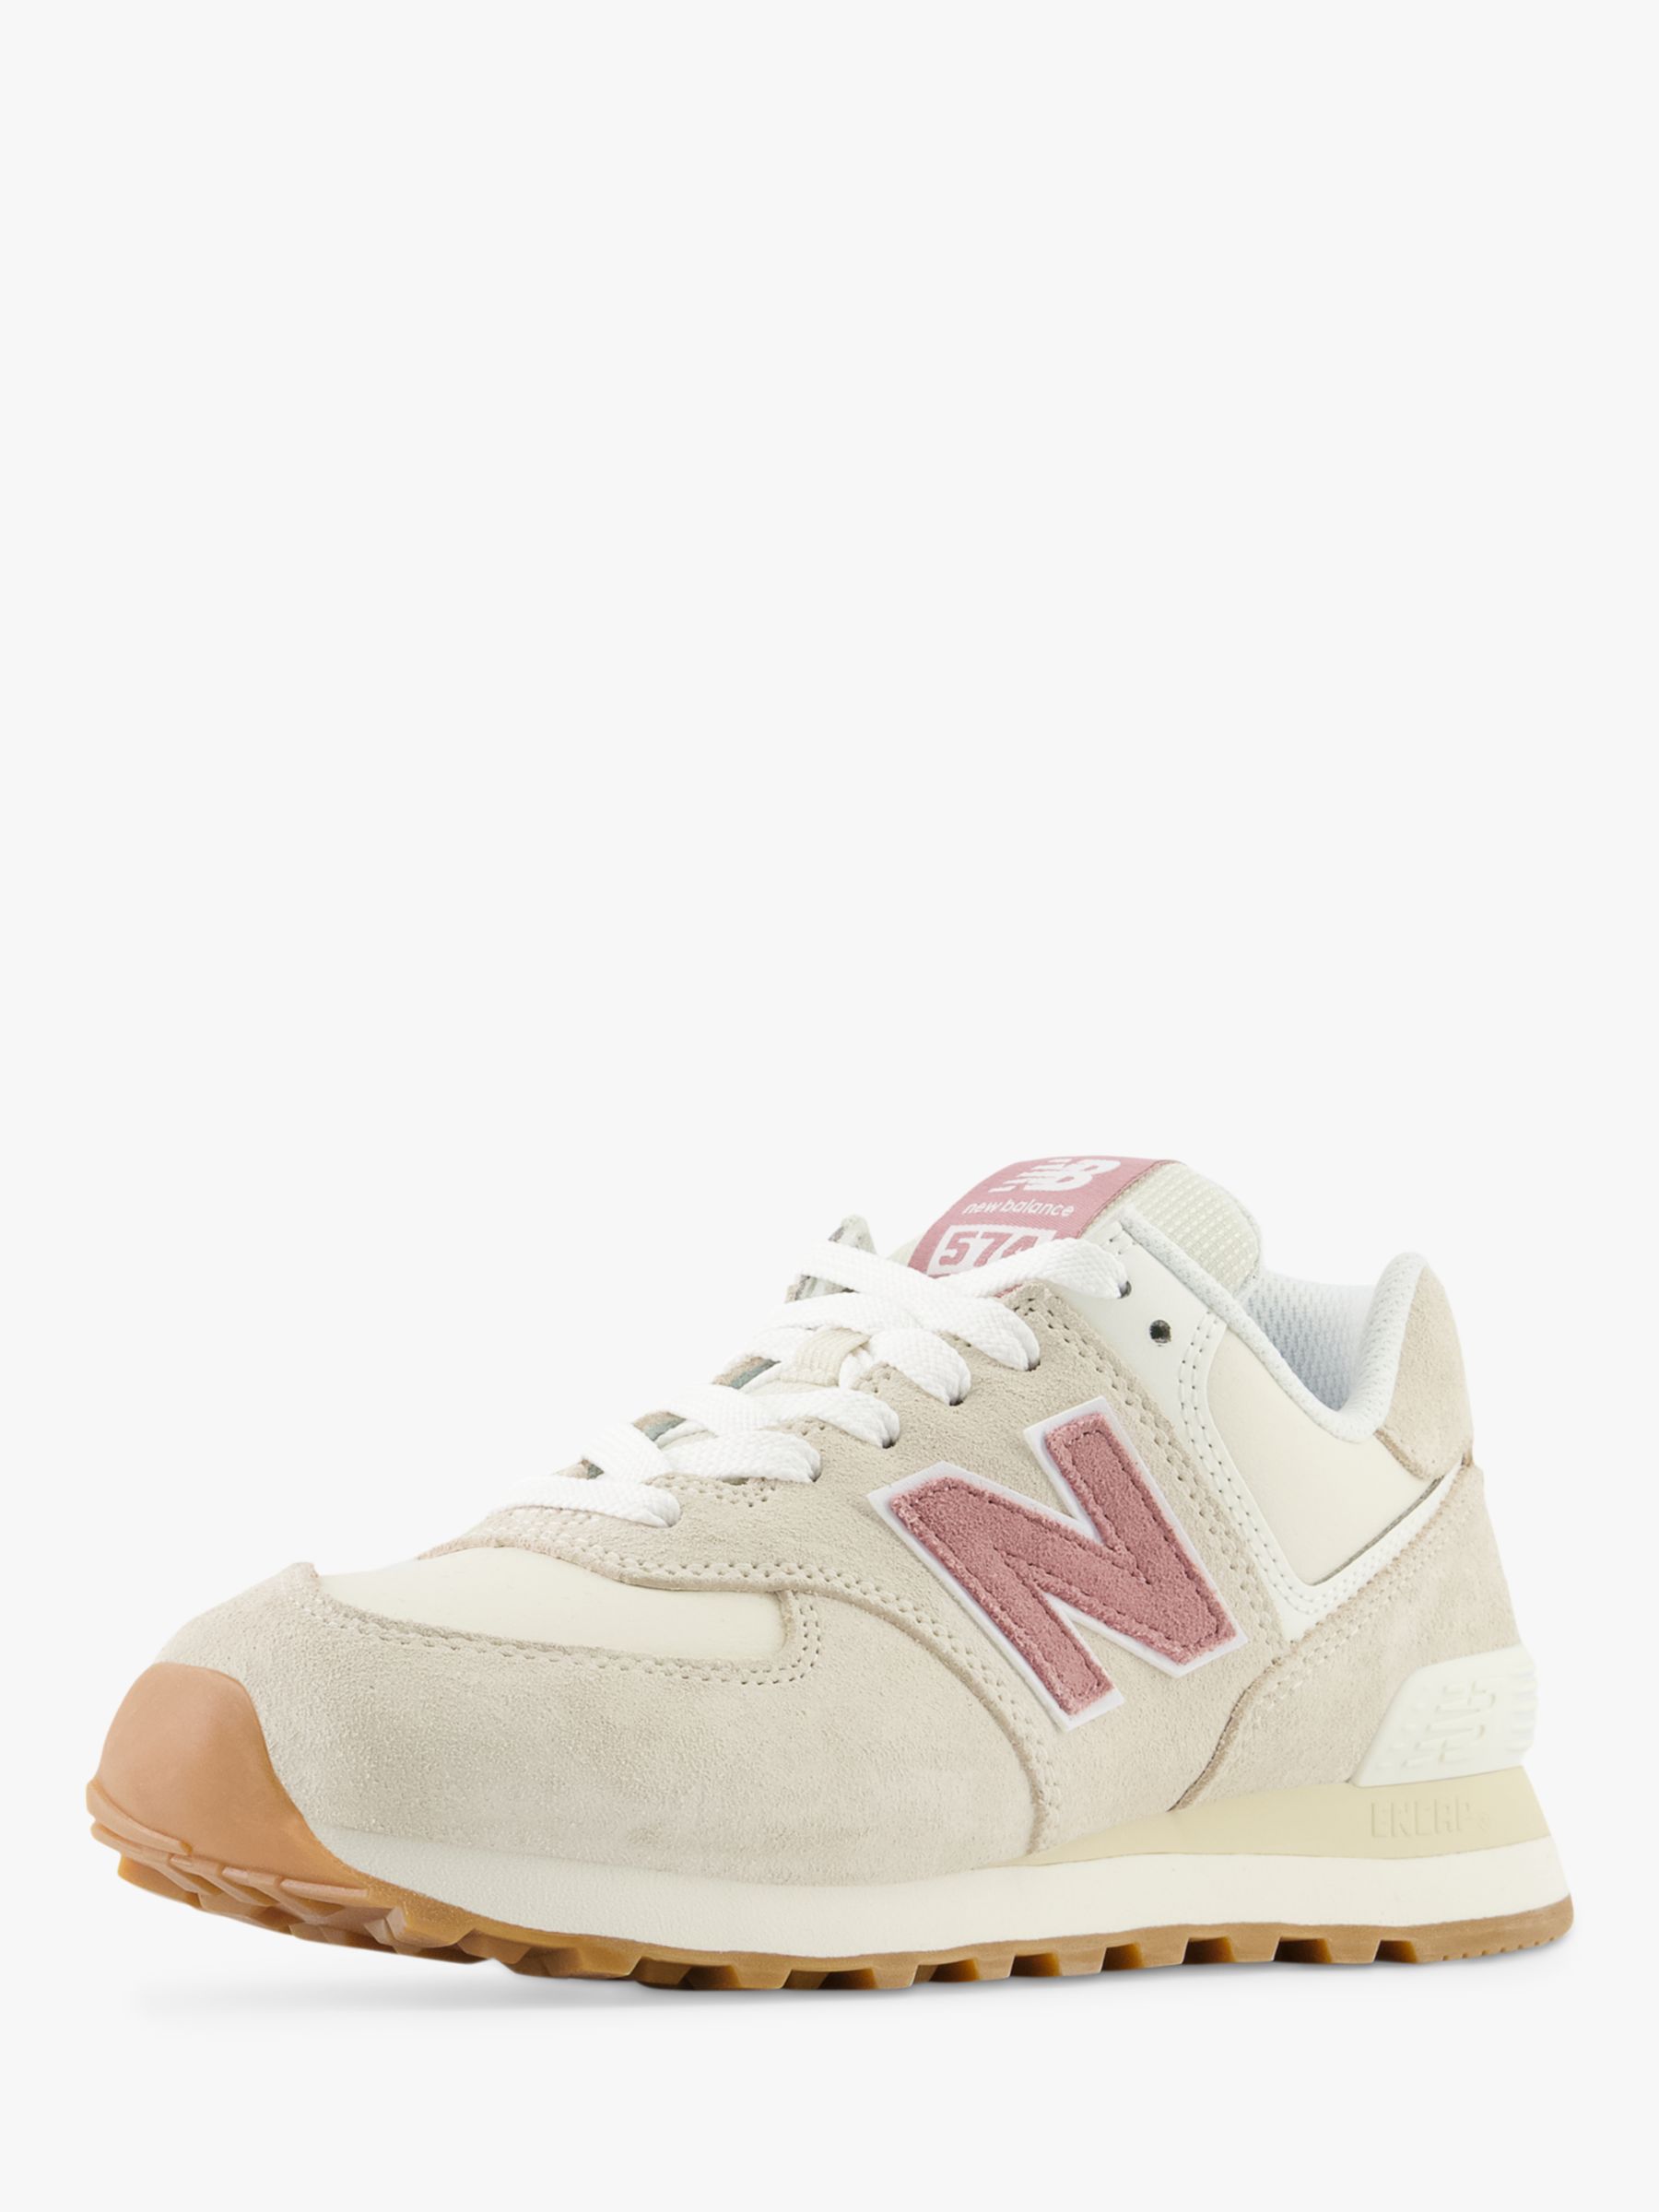 New Balance 574 Suede Mesh Trainers, Linen at John Lewis & Partners